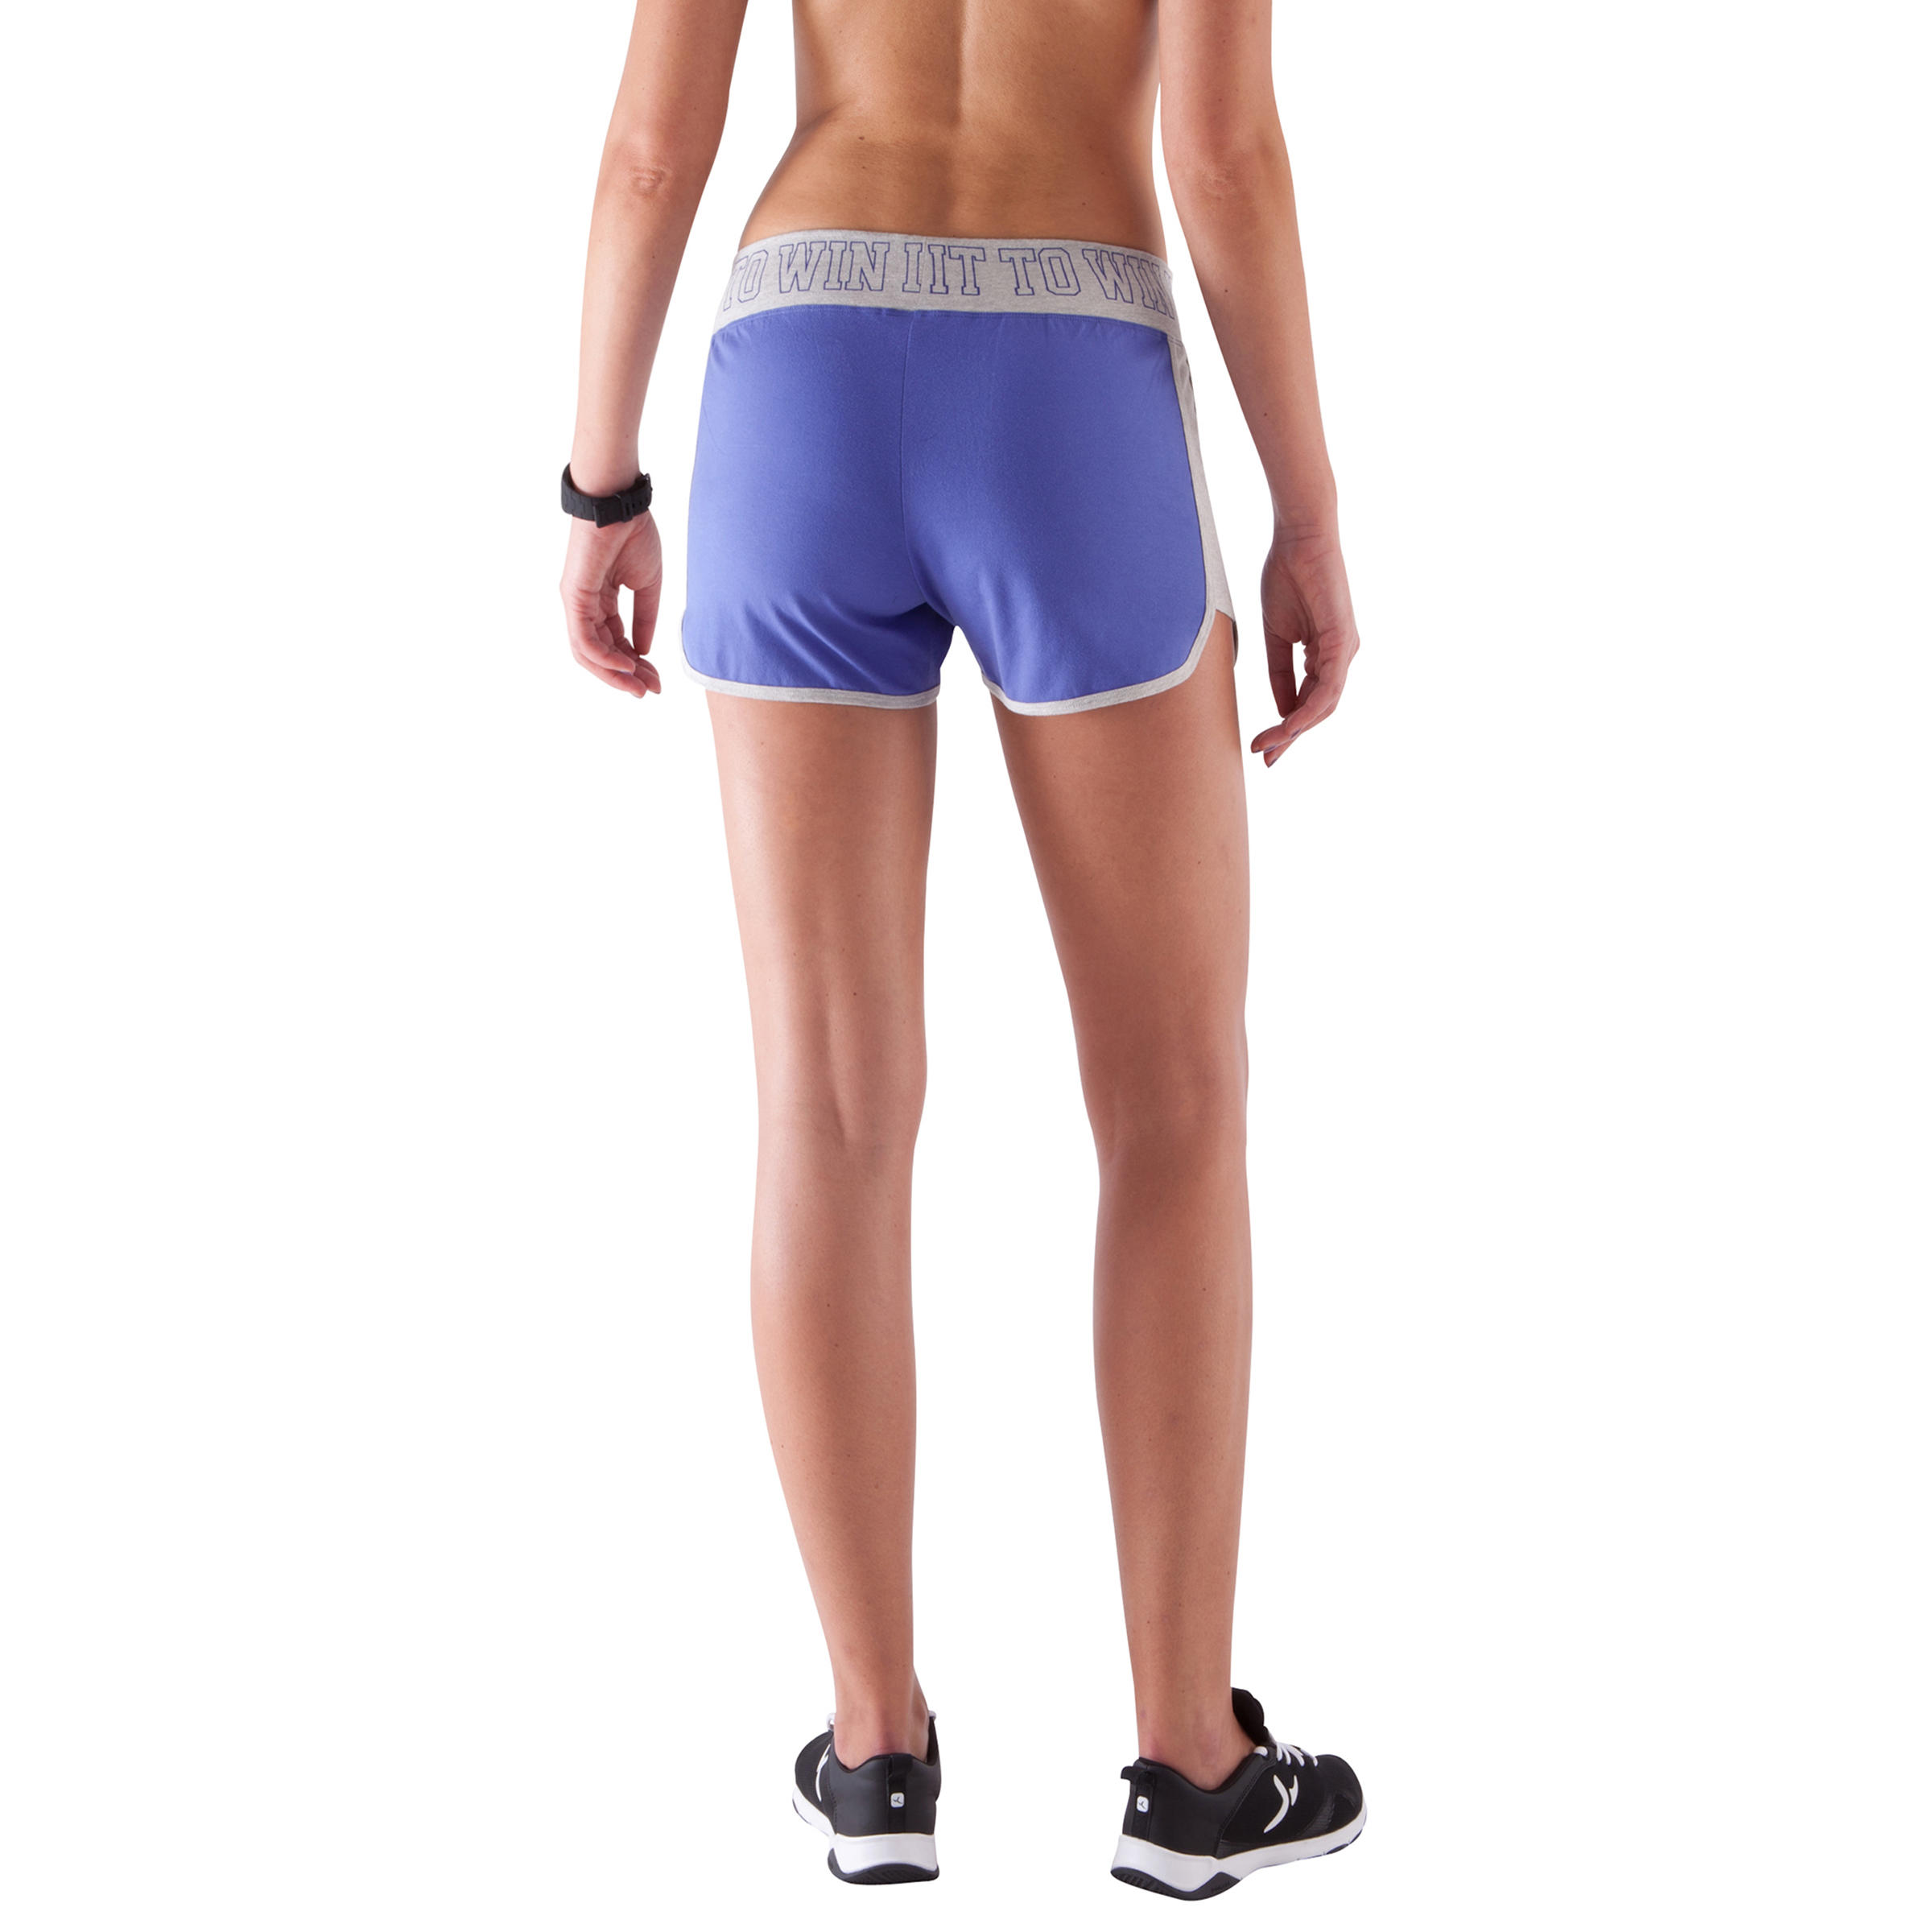 Women's Fitness Shorts with Contrasting Waistband - Blue/Grey 6/10